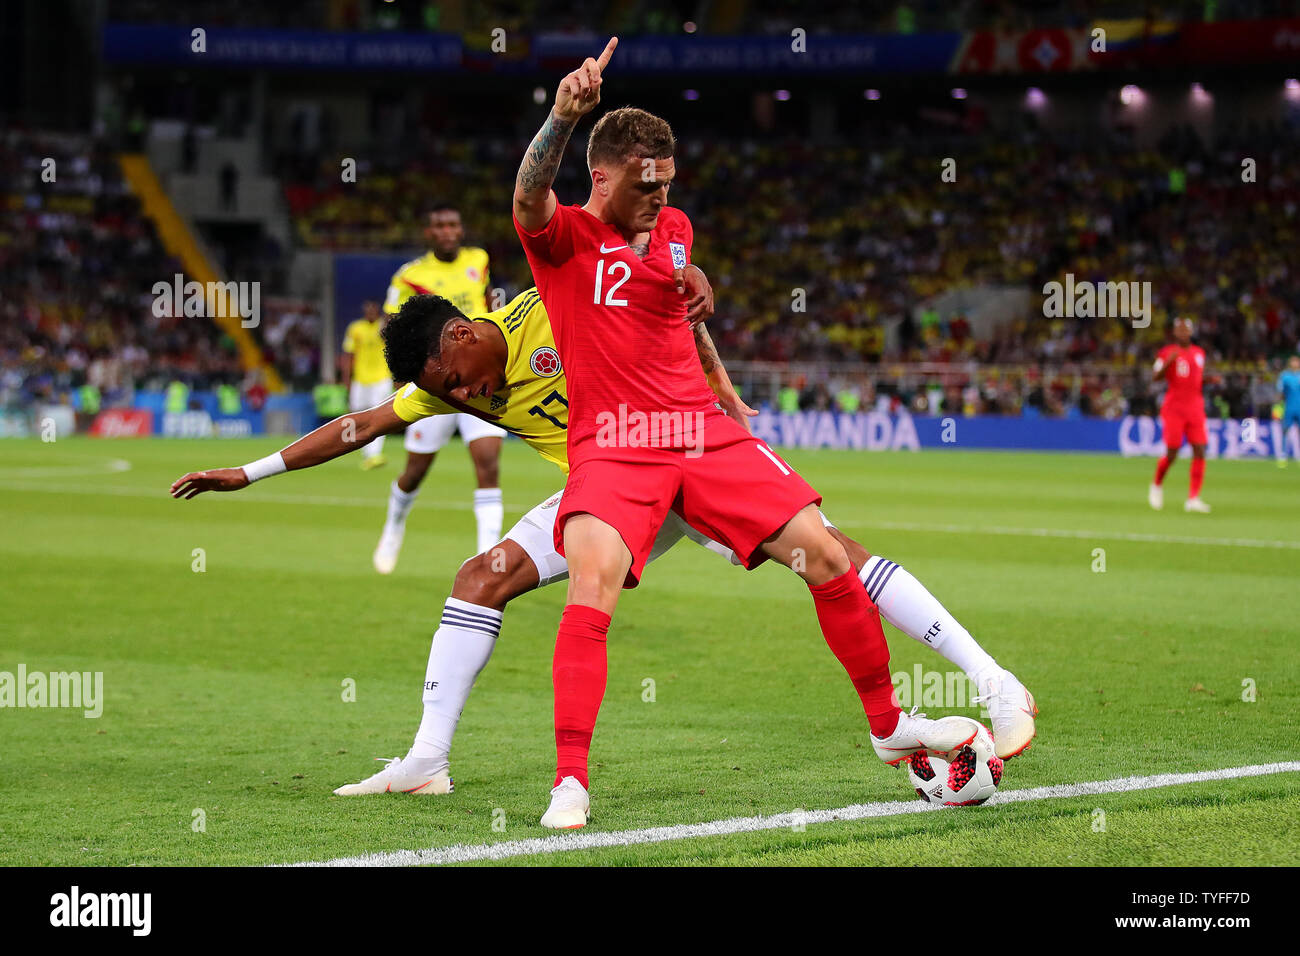 Kieran Trippier of England is challenged by Johan Mojica (L) of Colombia during the 2018 FIFA World Cup Round of 16 match at Spartak Stadium in Moscow, Russia on July 3, 2018. England beat Colombia 4-3 on penalties to qualify for the quarter-finals. Photo by Chris Brunskill/UPI Stock Photo